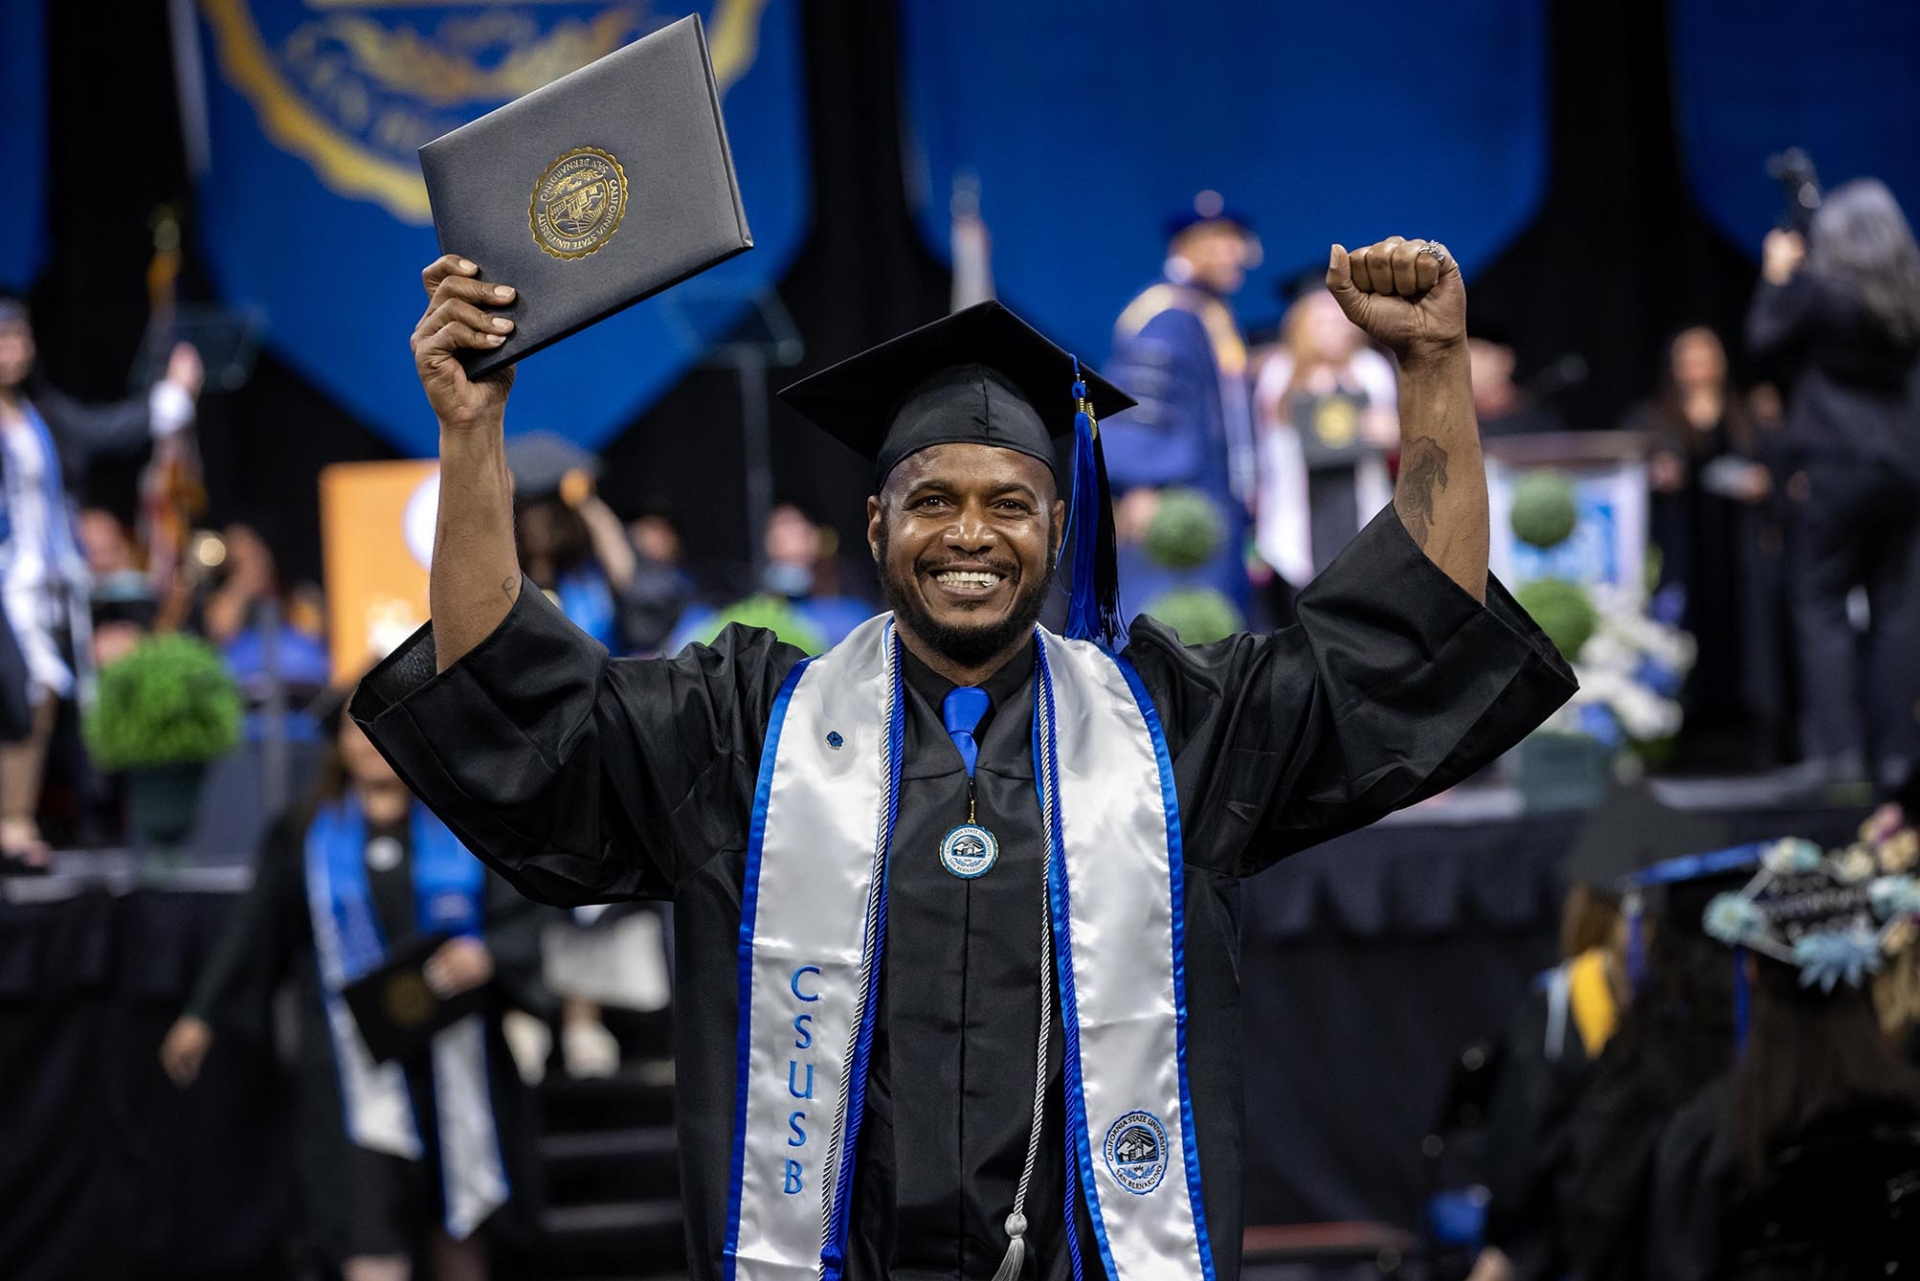 A male graduate celebrates at the CSBS Commencement ceremony on May 17